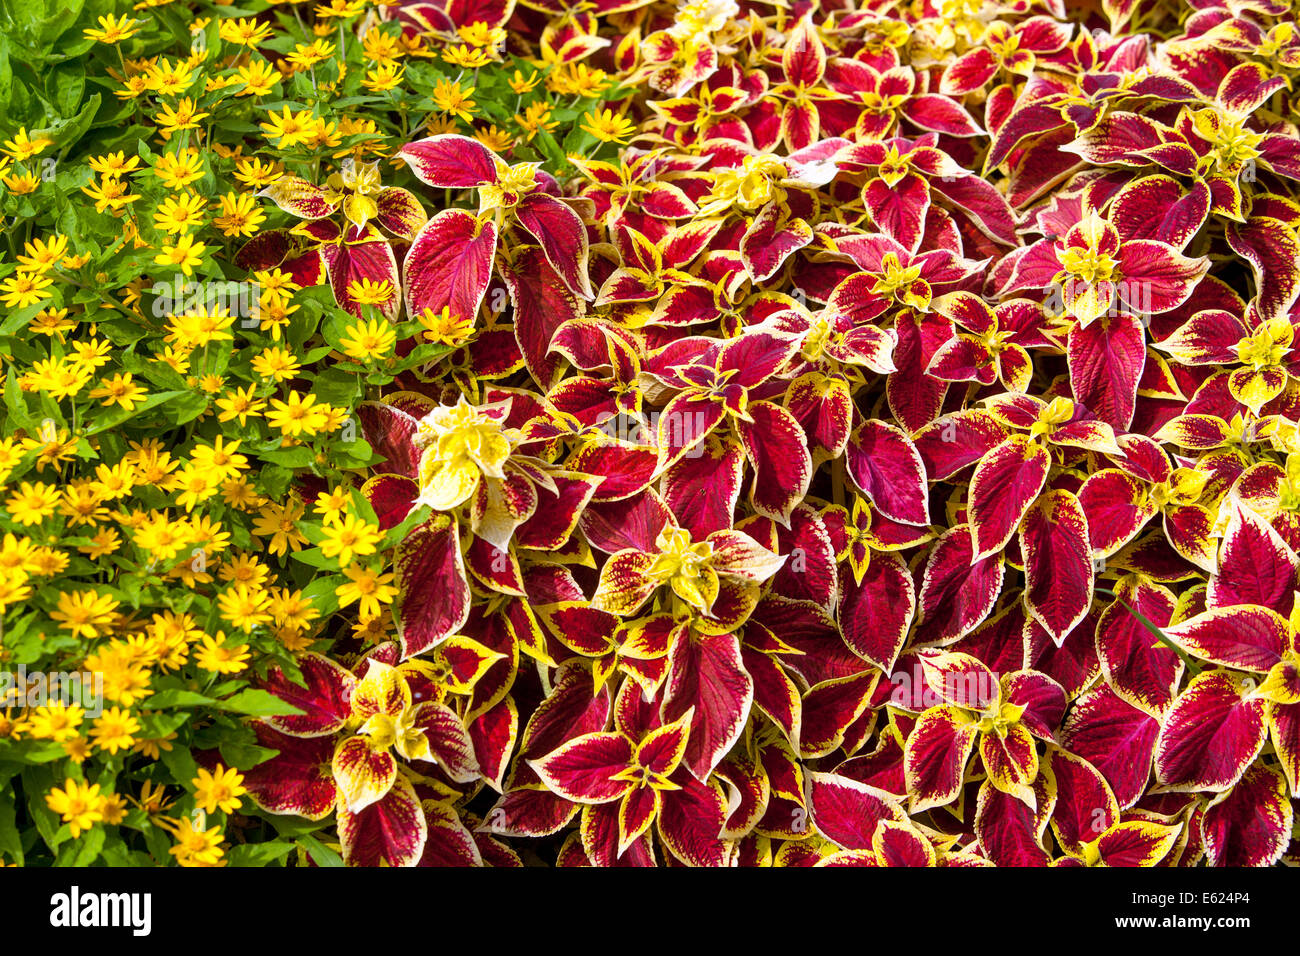 Colorful flower bed of annual flowers, Coleus 'Wizard scarlet', melampodium Butter Daisy Stock Photo